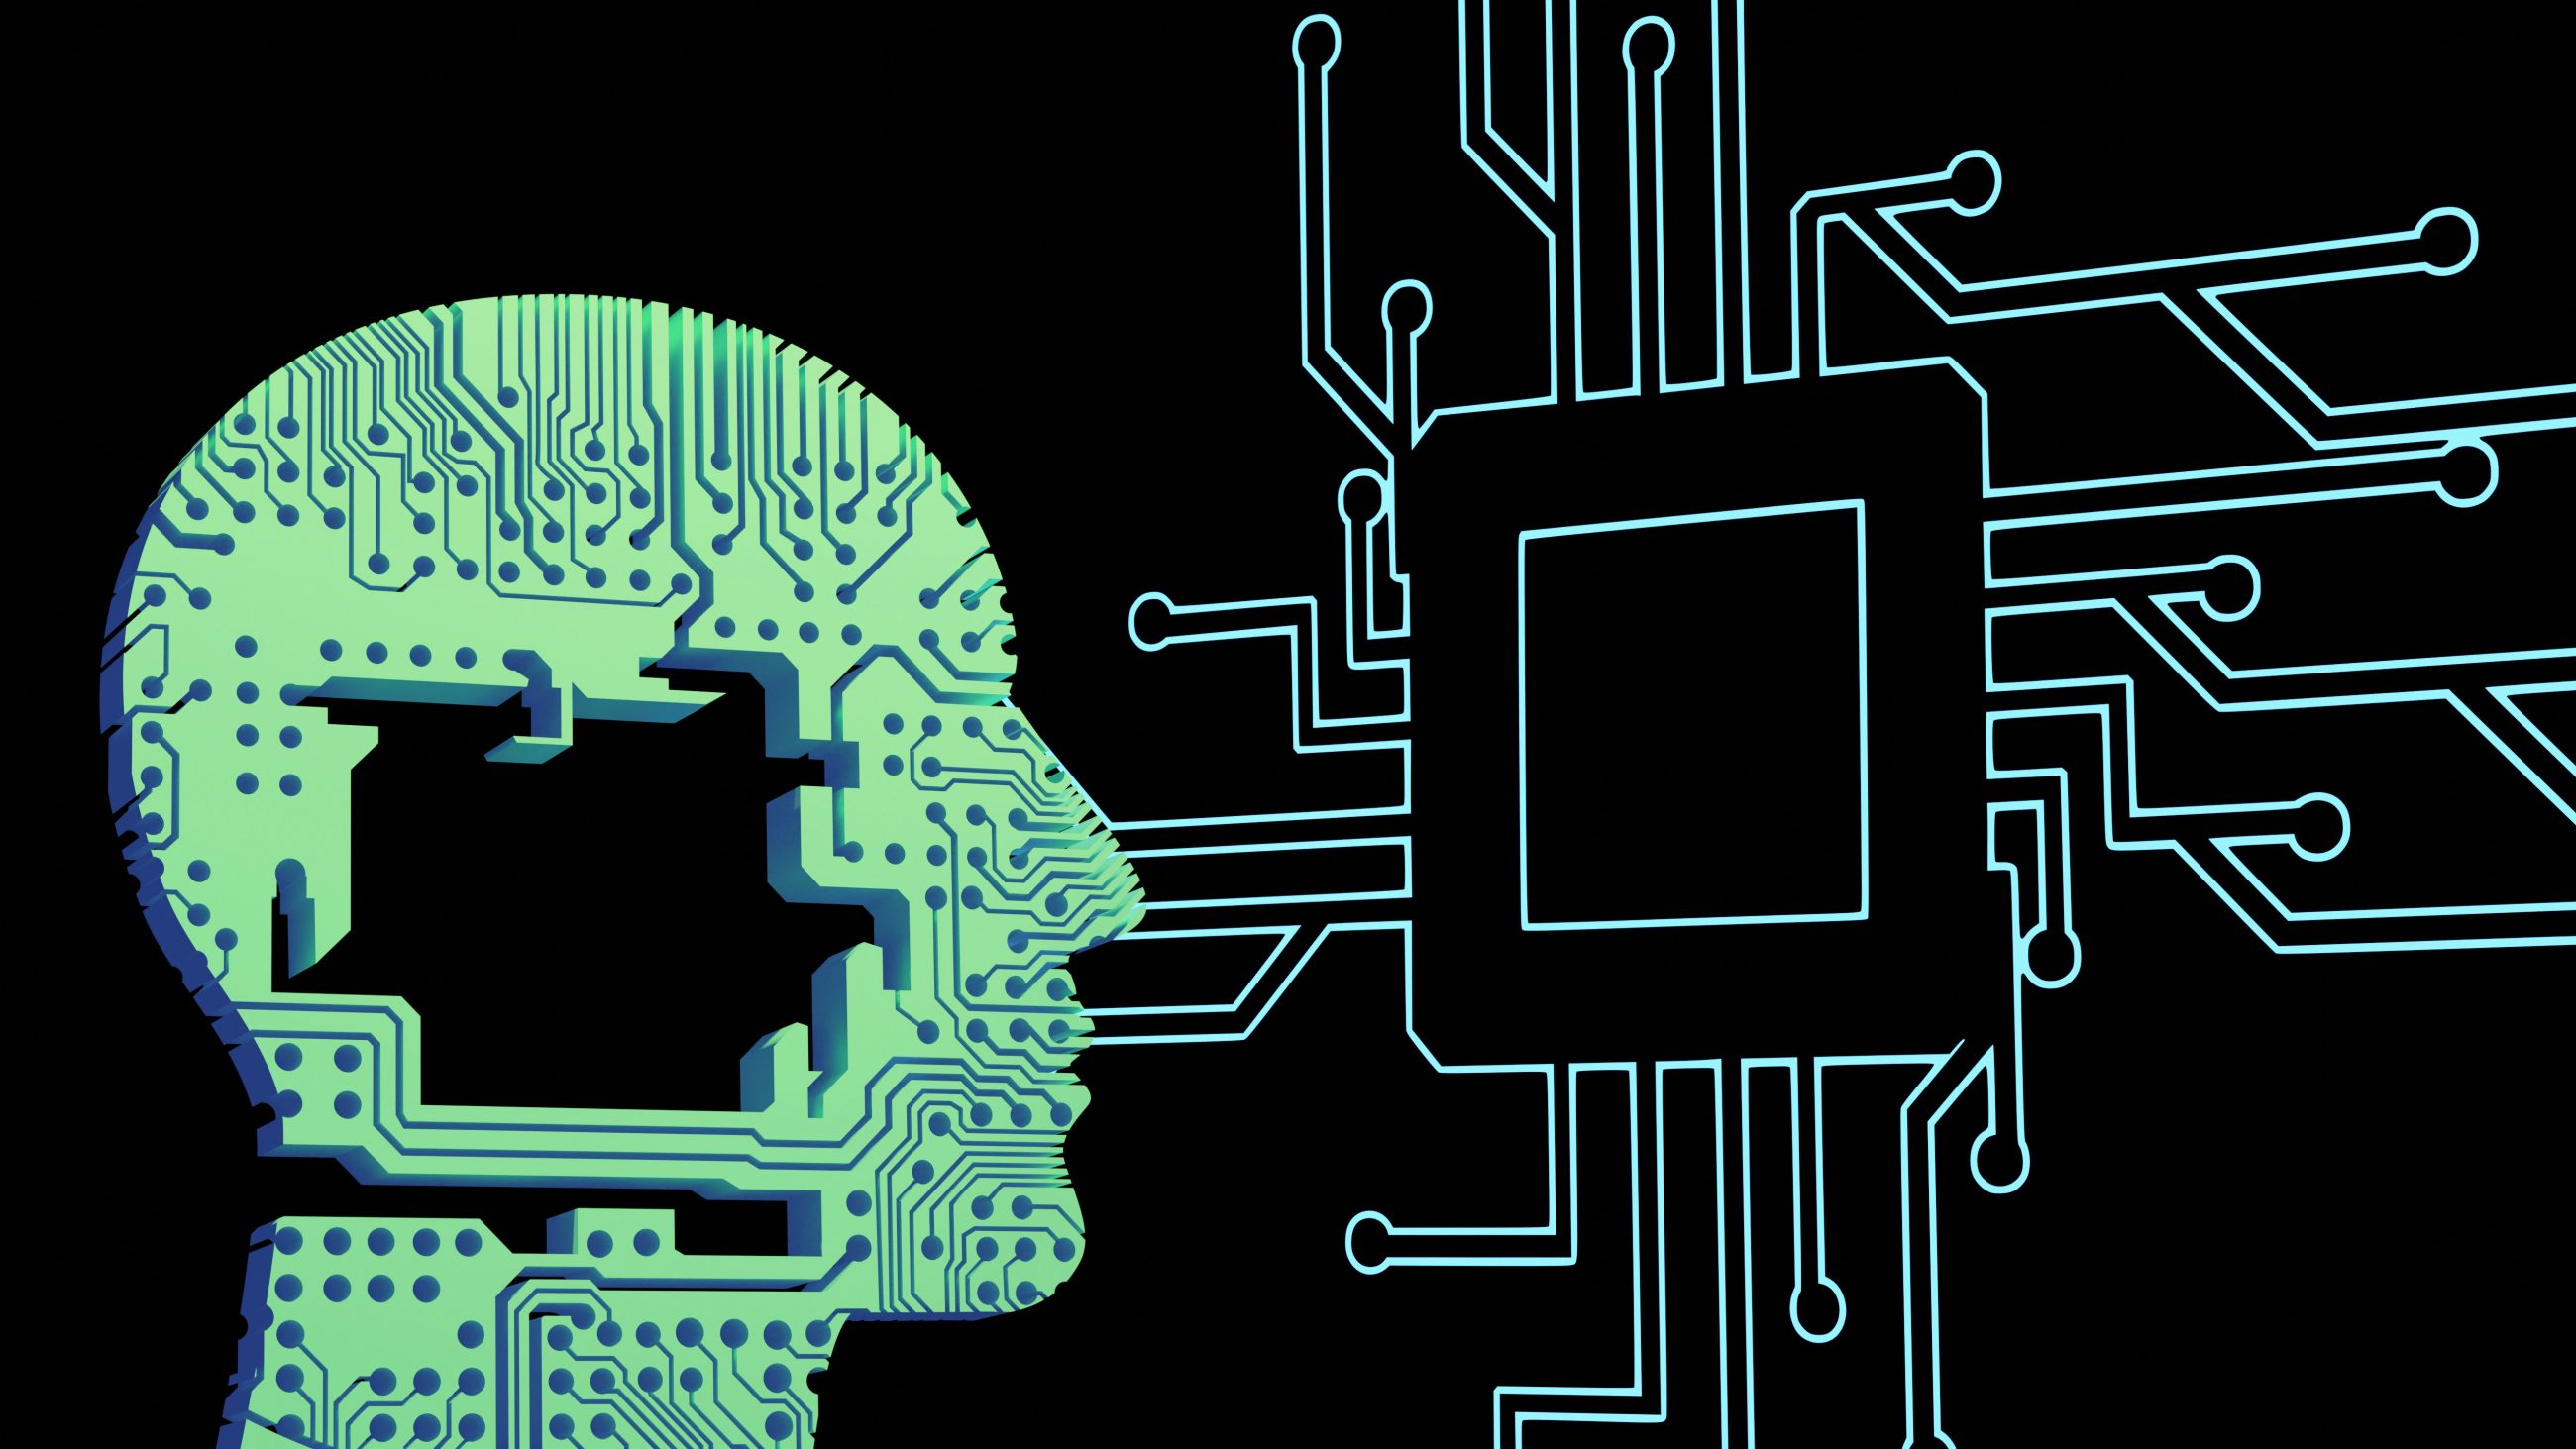 A person's head with a circuit board in front of it, representing AI tools